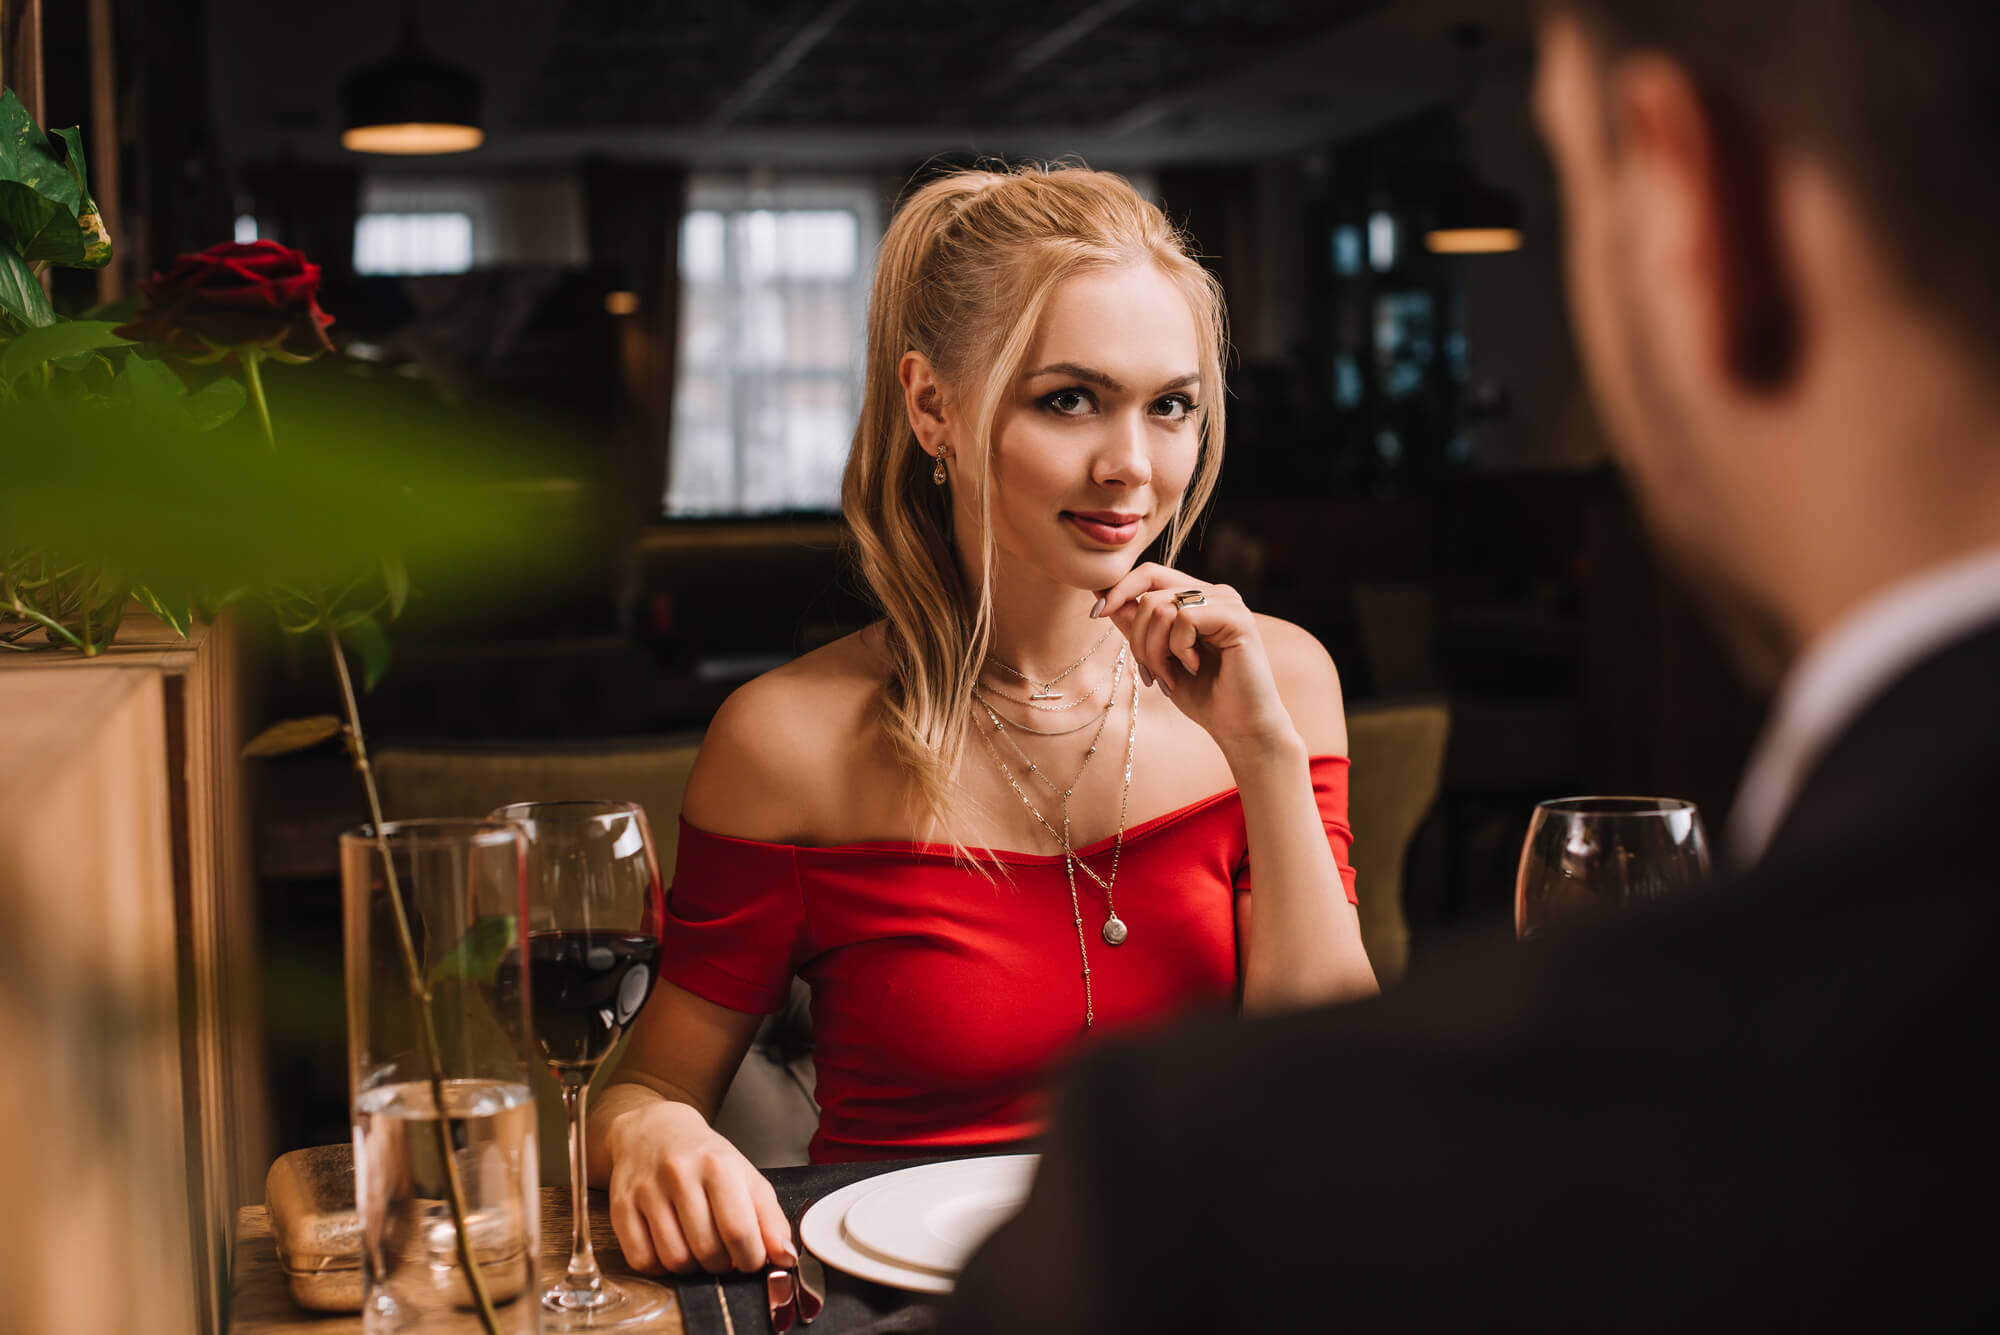 date in an expensive restaurant